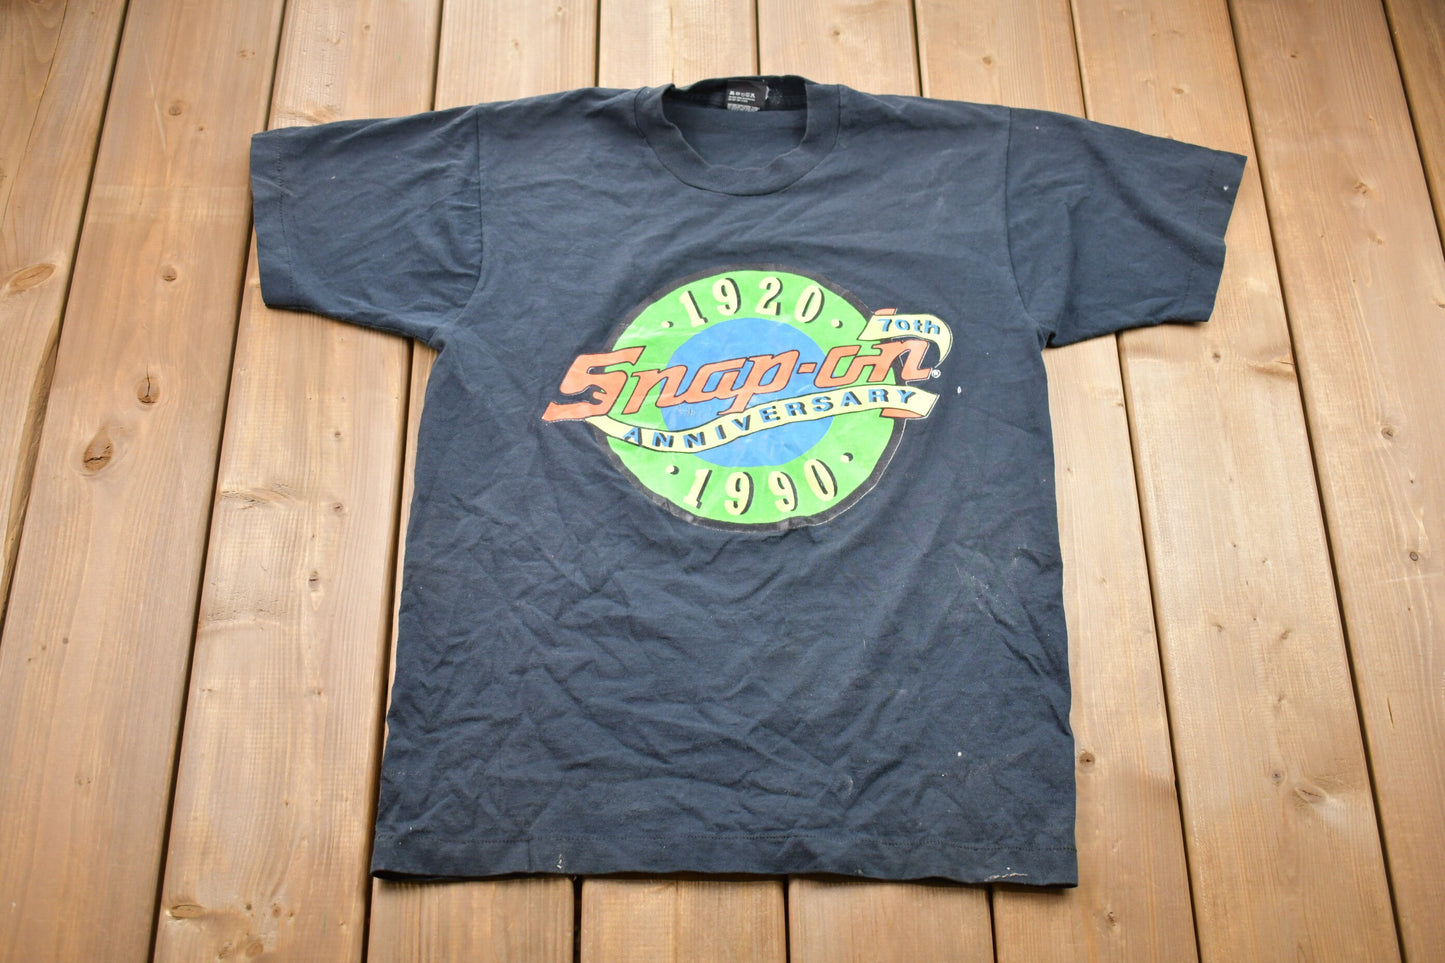 Vintage 1990 Snap-On Graphic T-Shirt / Graphic / 80s / 90s / Streetwear / Retro Style / Single Stitch / Made In USA